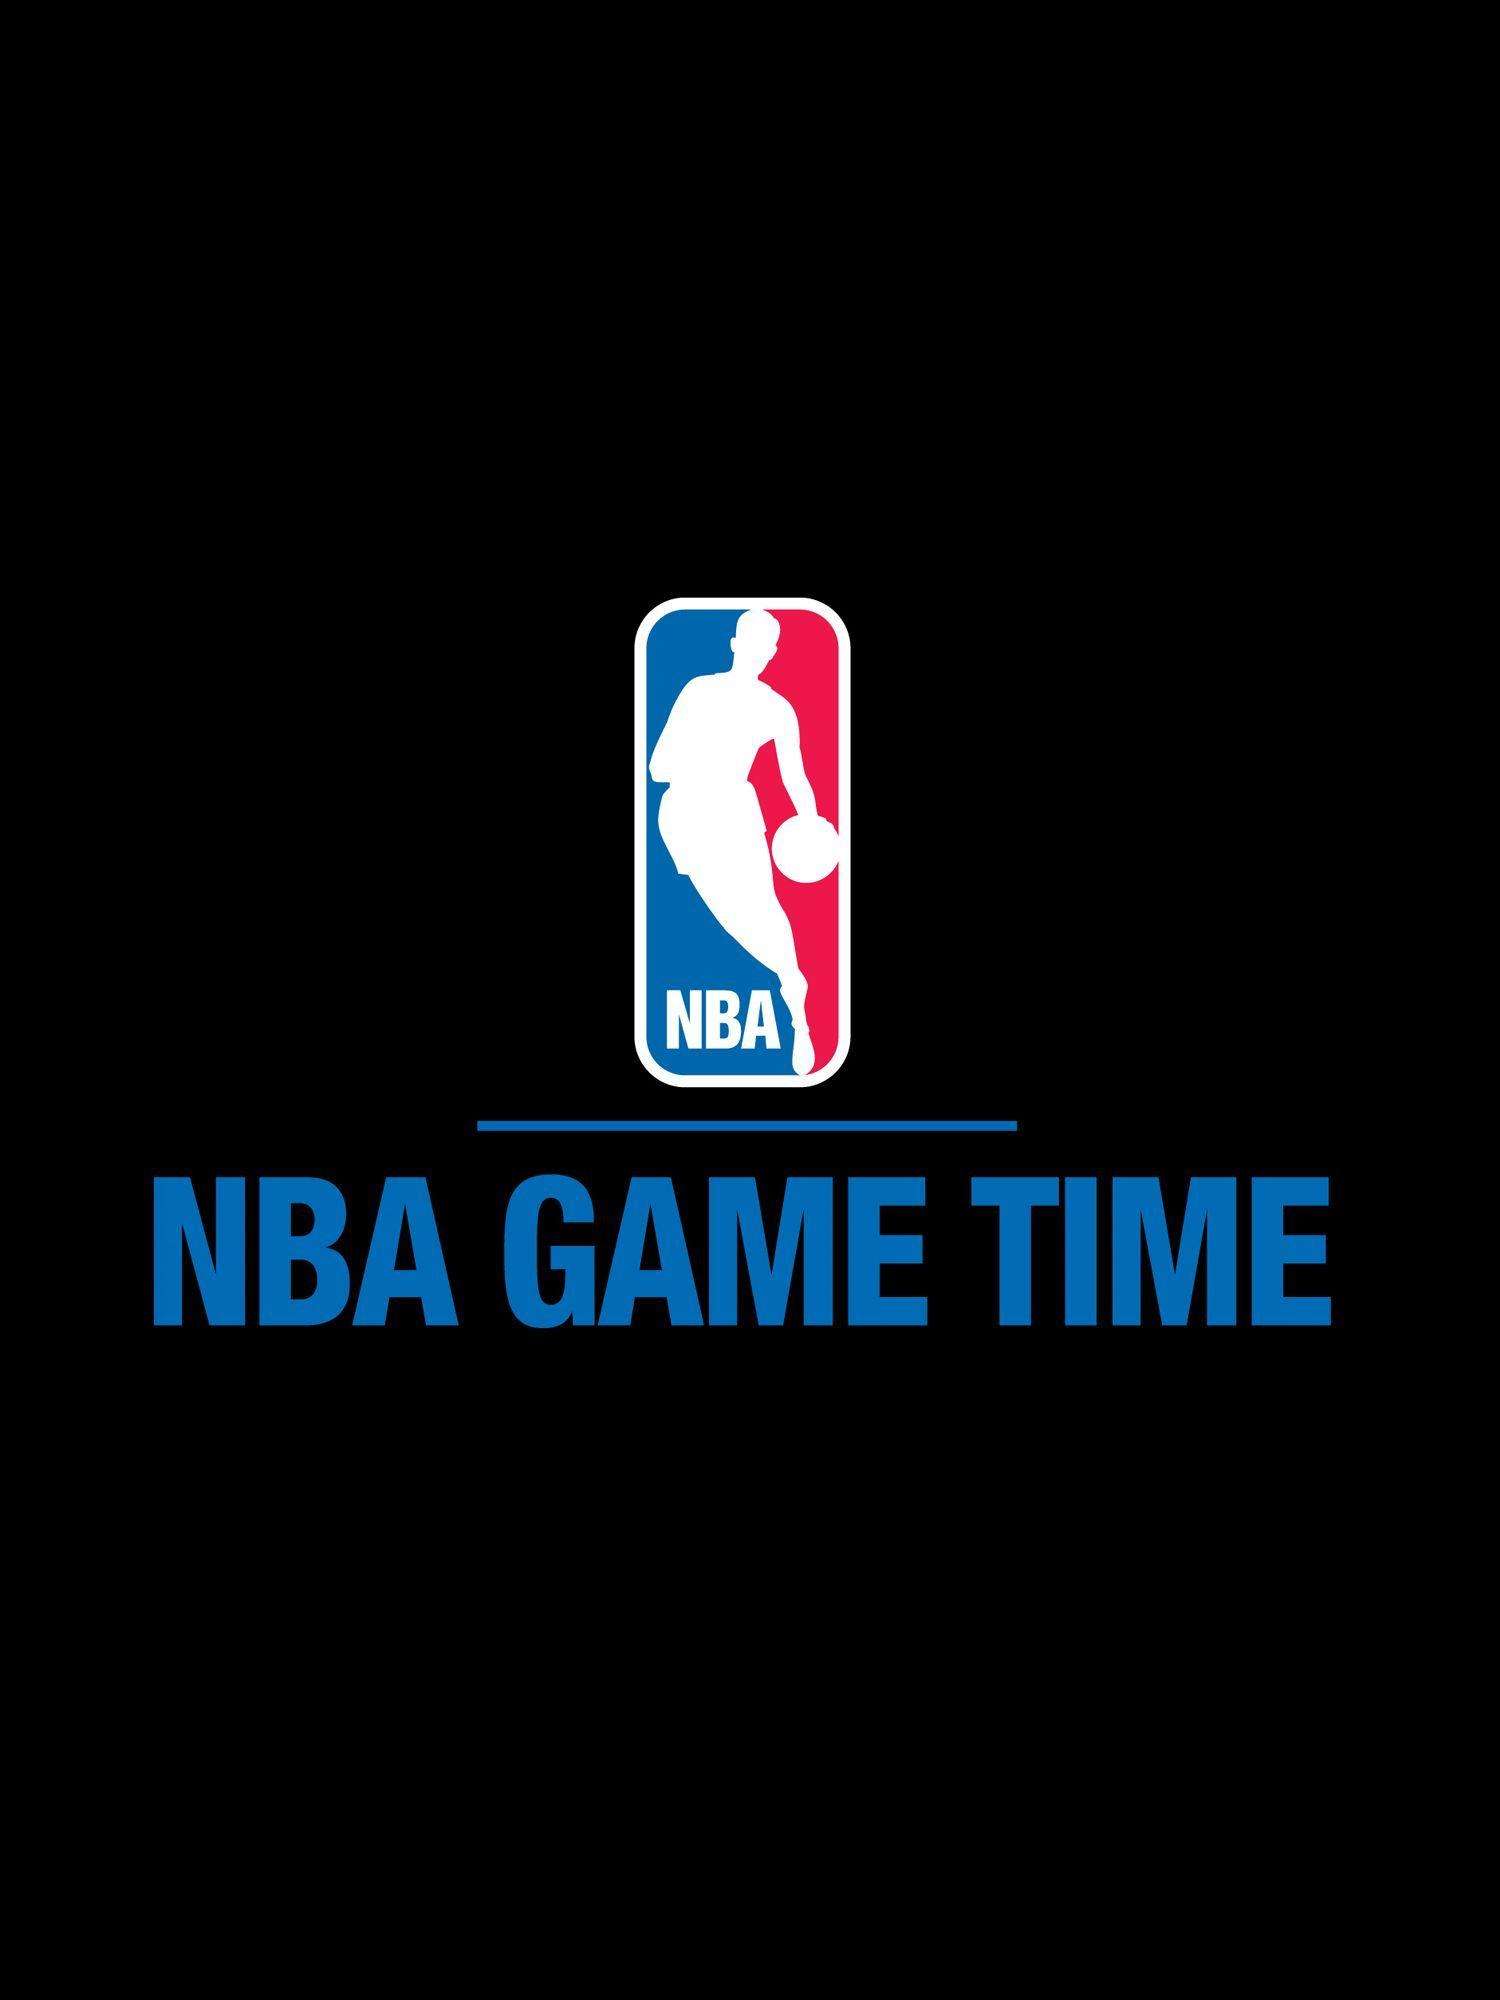 NBA Game Time Logo - NBA Gametime TV Show: News, Videos, Full Episodes and More | TV Guide